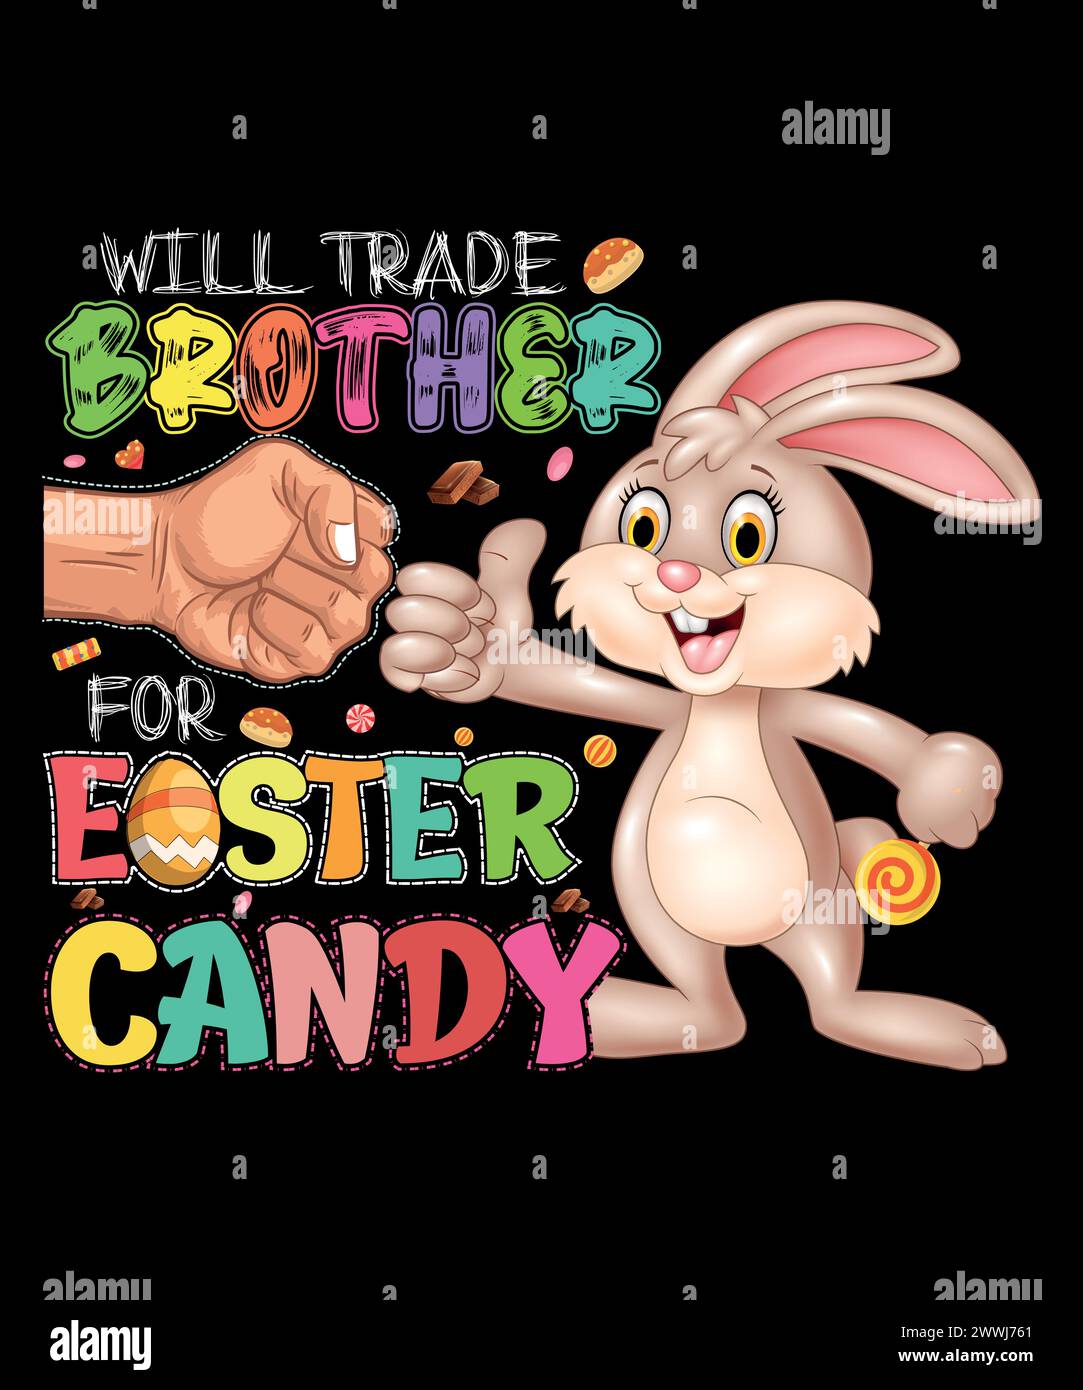 Easter day t shirt design. Sweet deals only: Will trade brother for Easter candy. Stock Vector